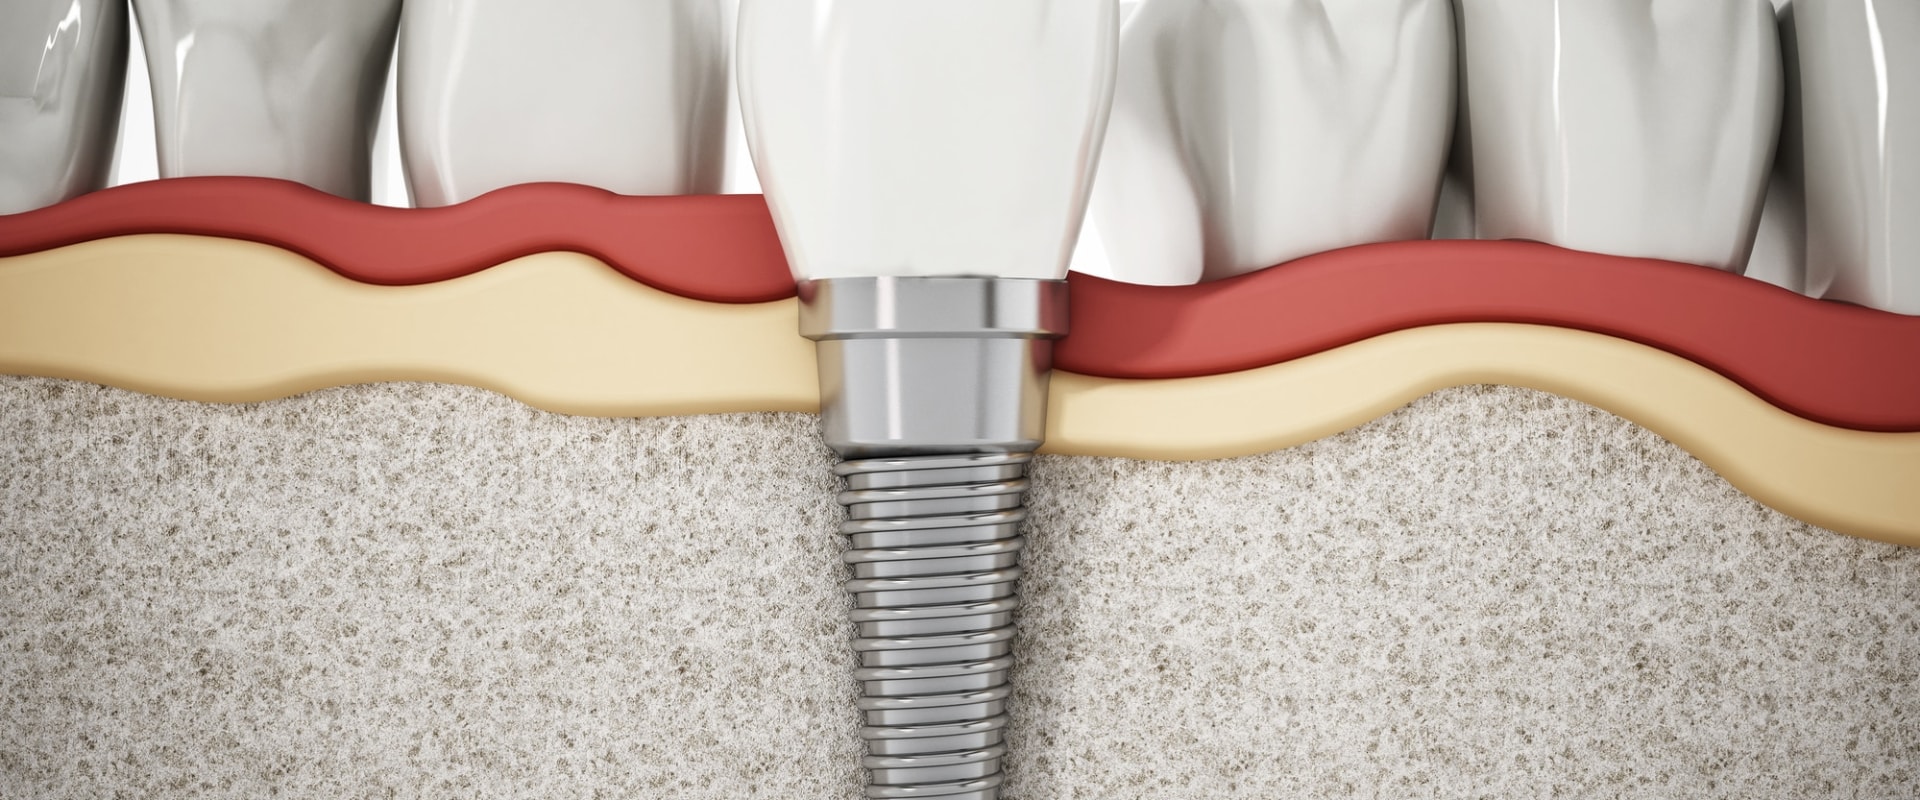 Can dental implants cause cancer?